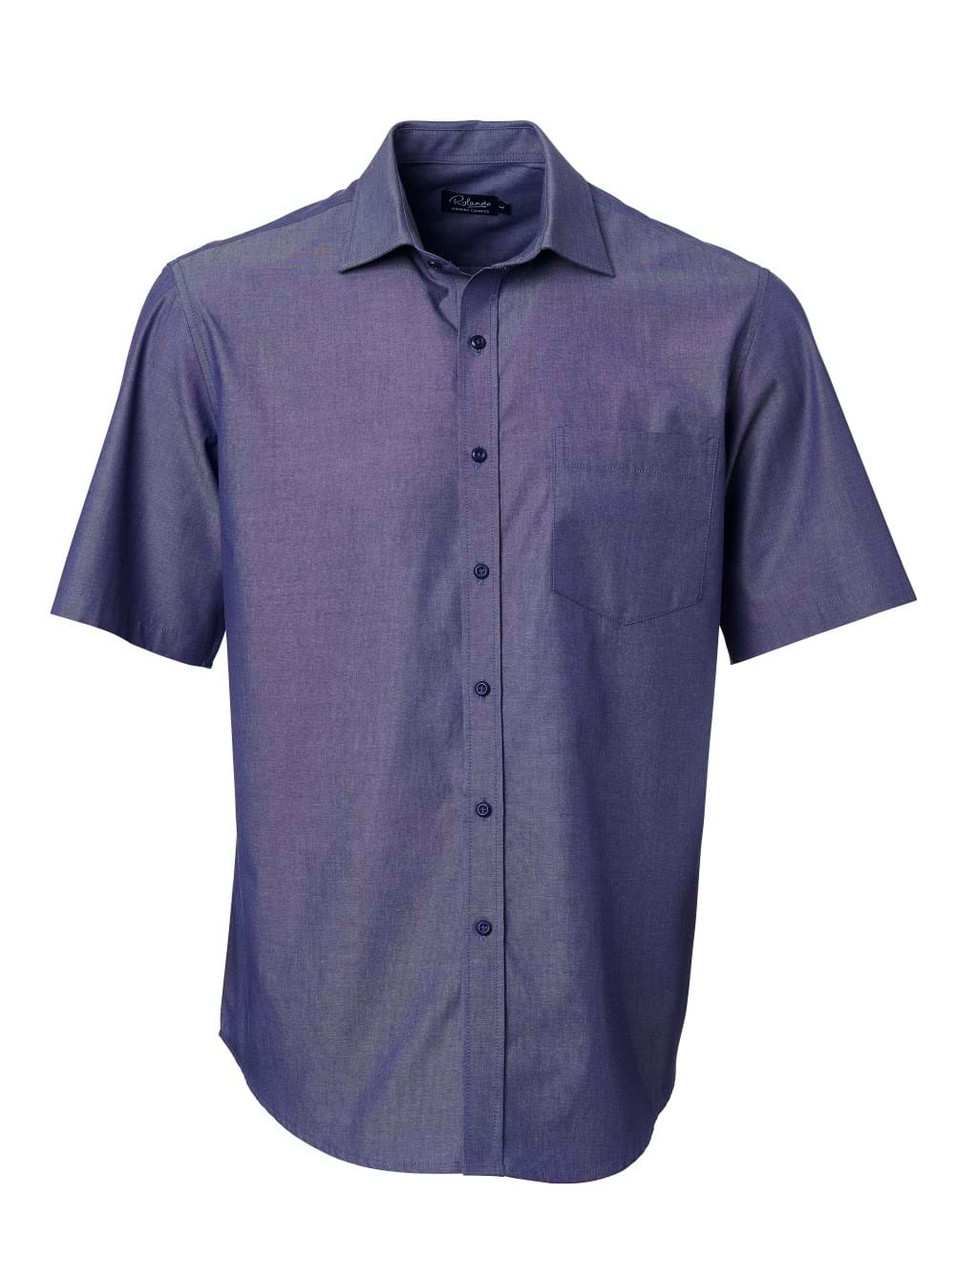 Mens Avery K238 S/S Shirt 100% Cotton | Azulwear Cape Town, South Africa